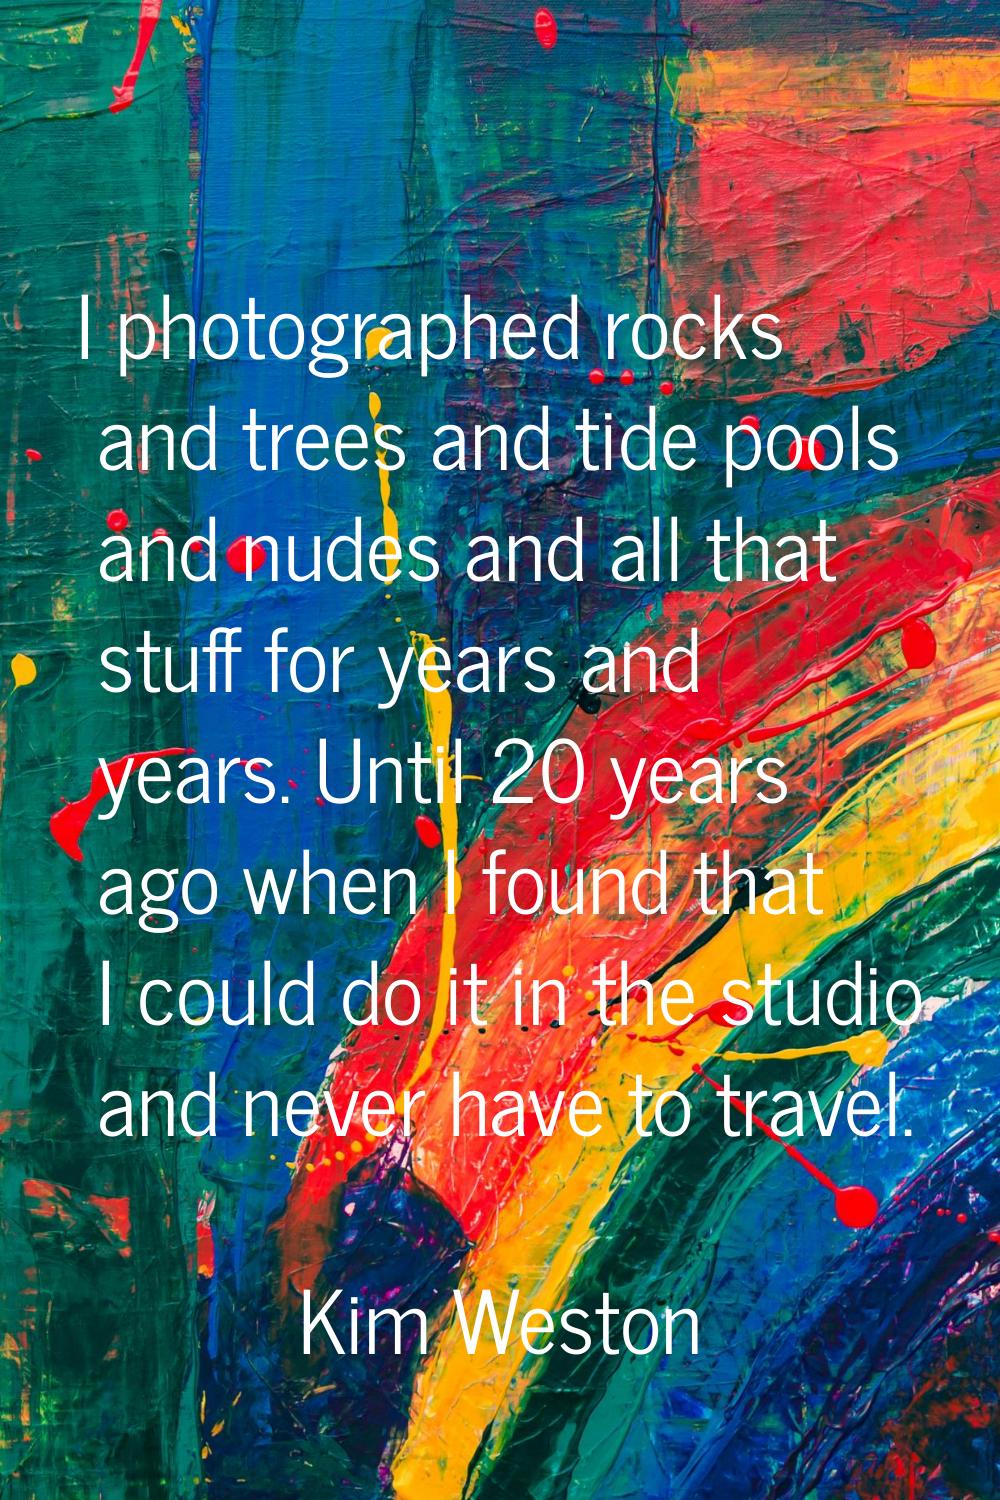 I photographed rocks and trees and tide pools and nudes and all that stuff for years and years. Unt